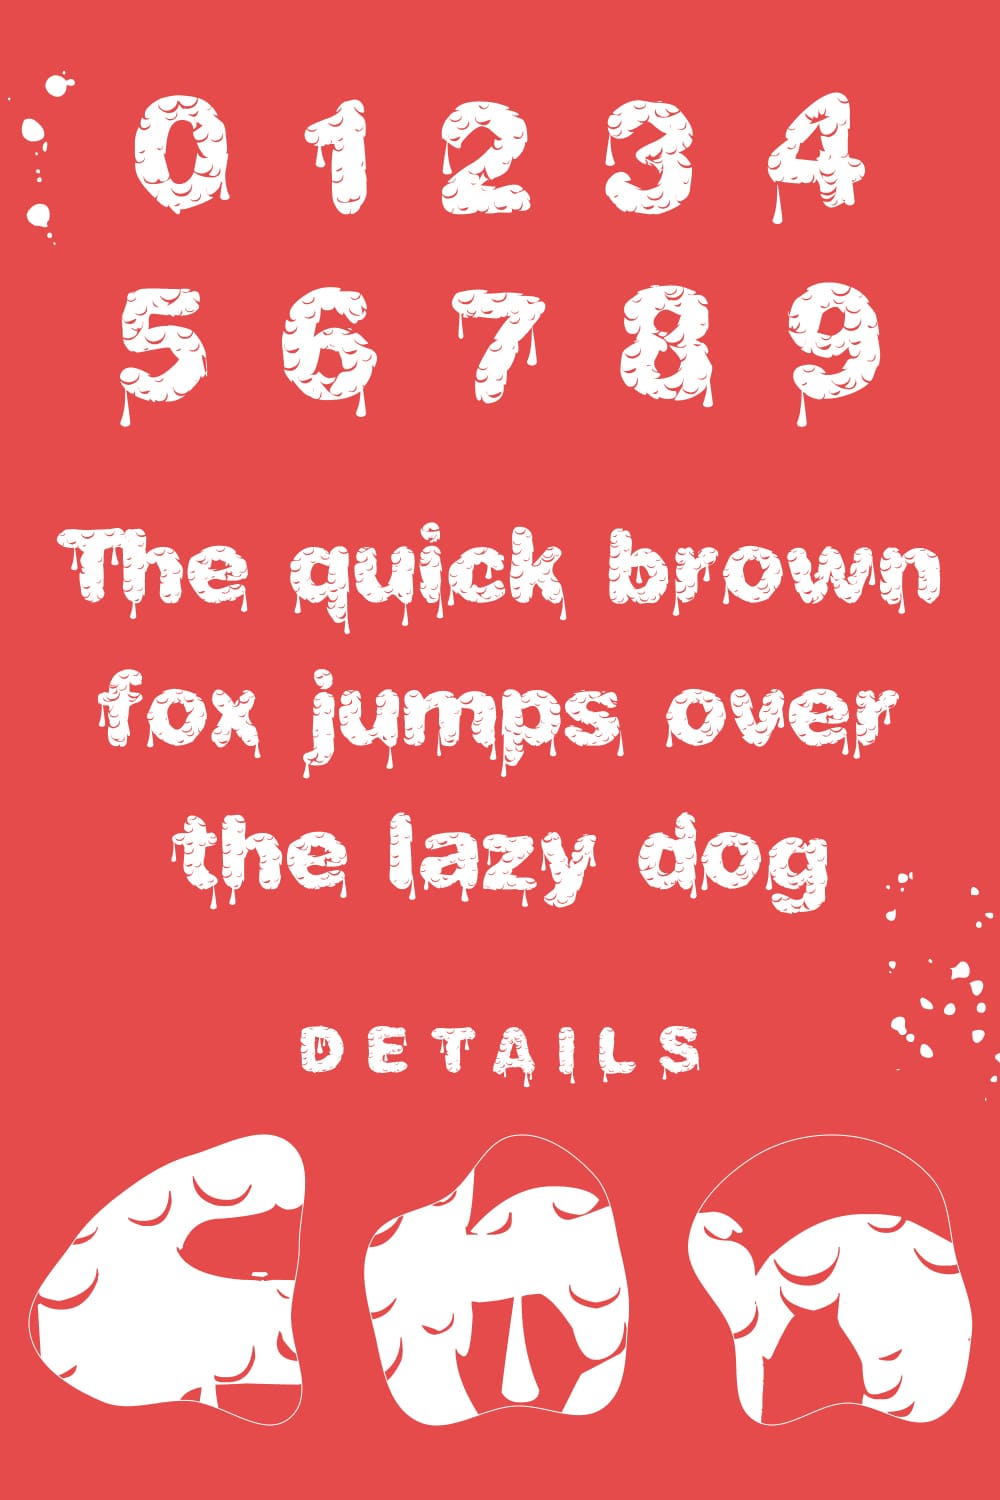 Here you can see the general view of numbers and letters of this type of font.